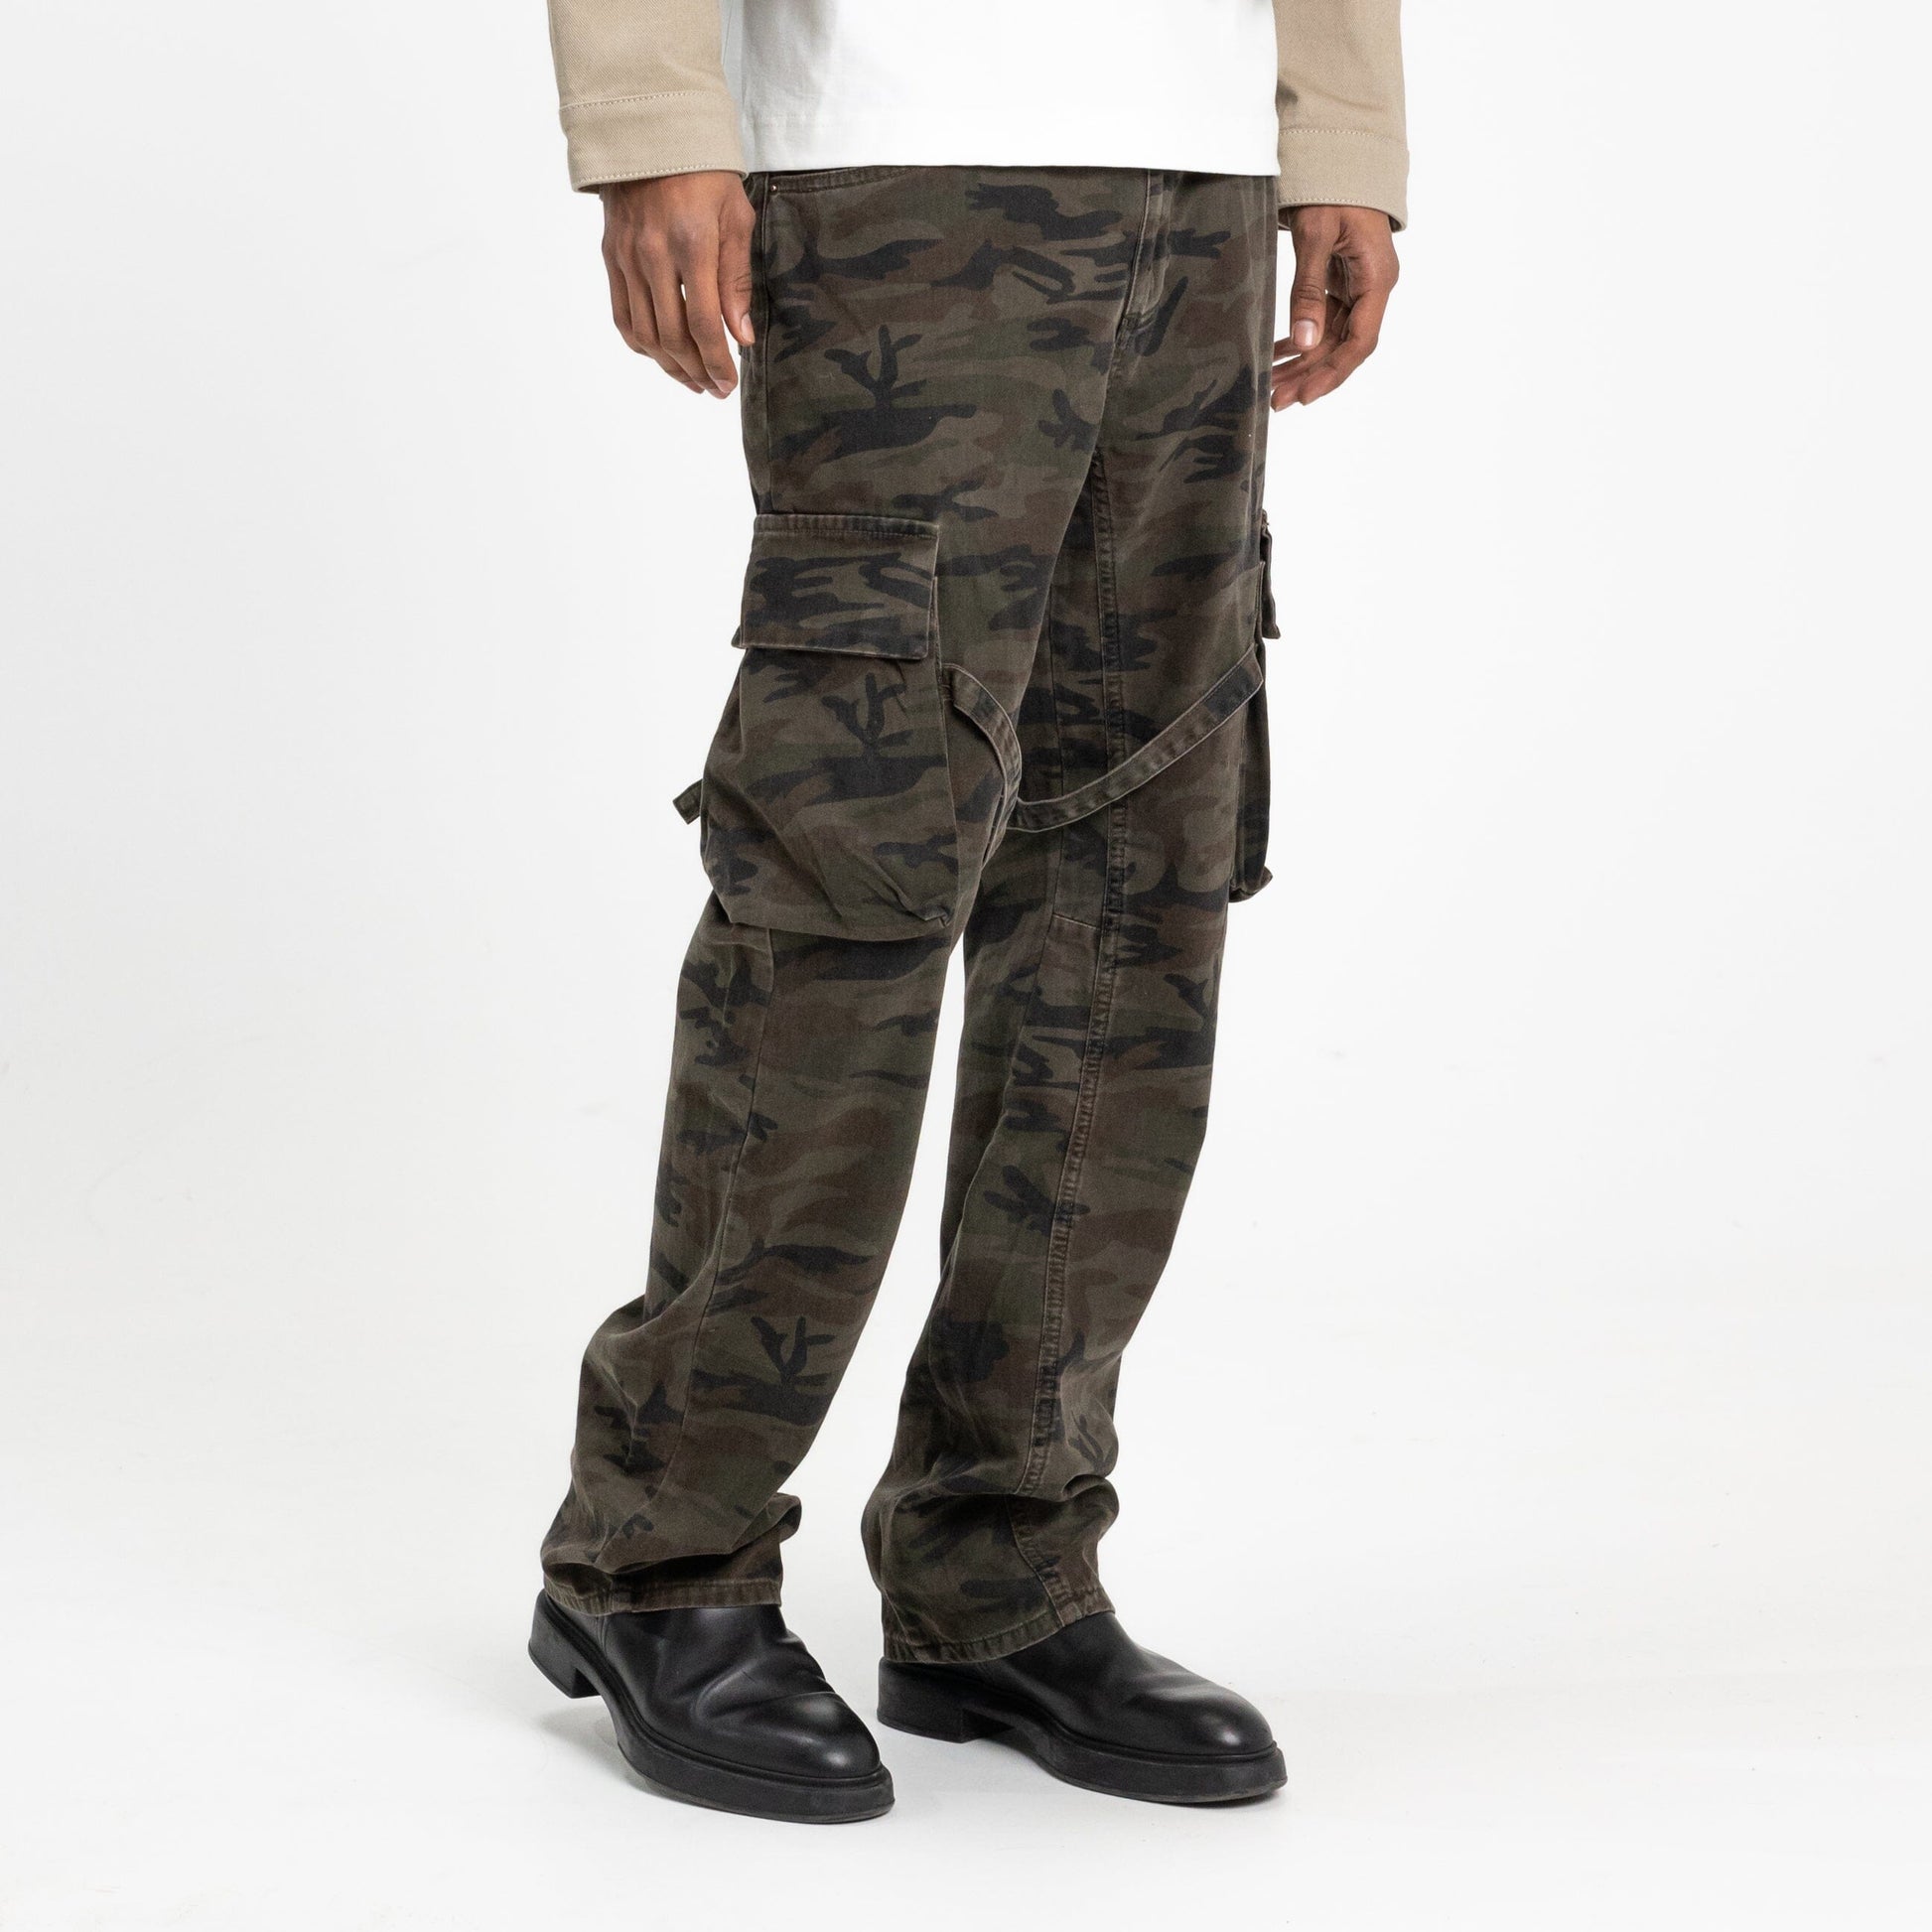 Strap Cargo Pants in Camo